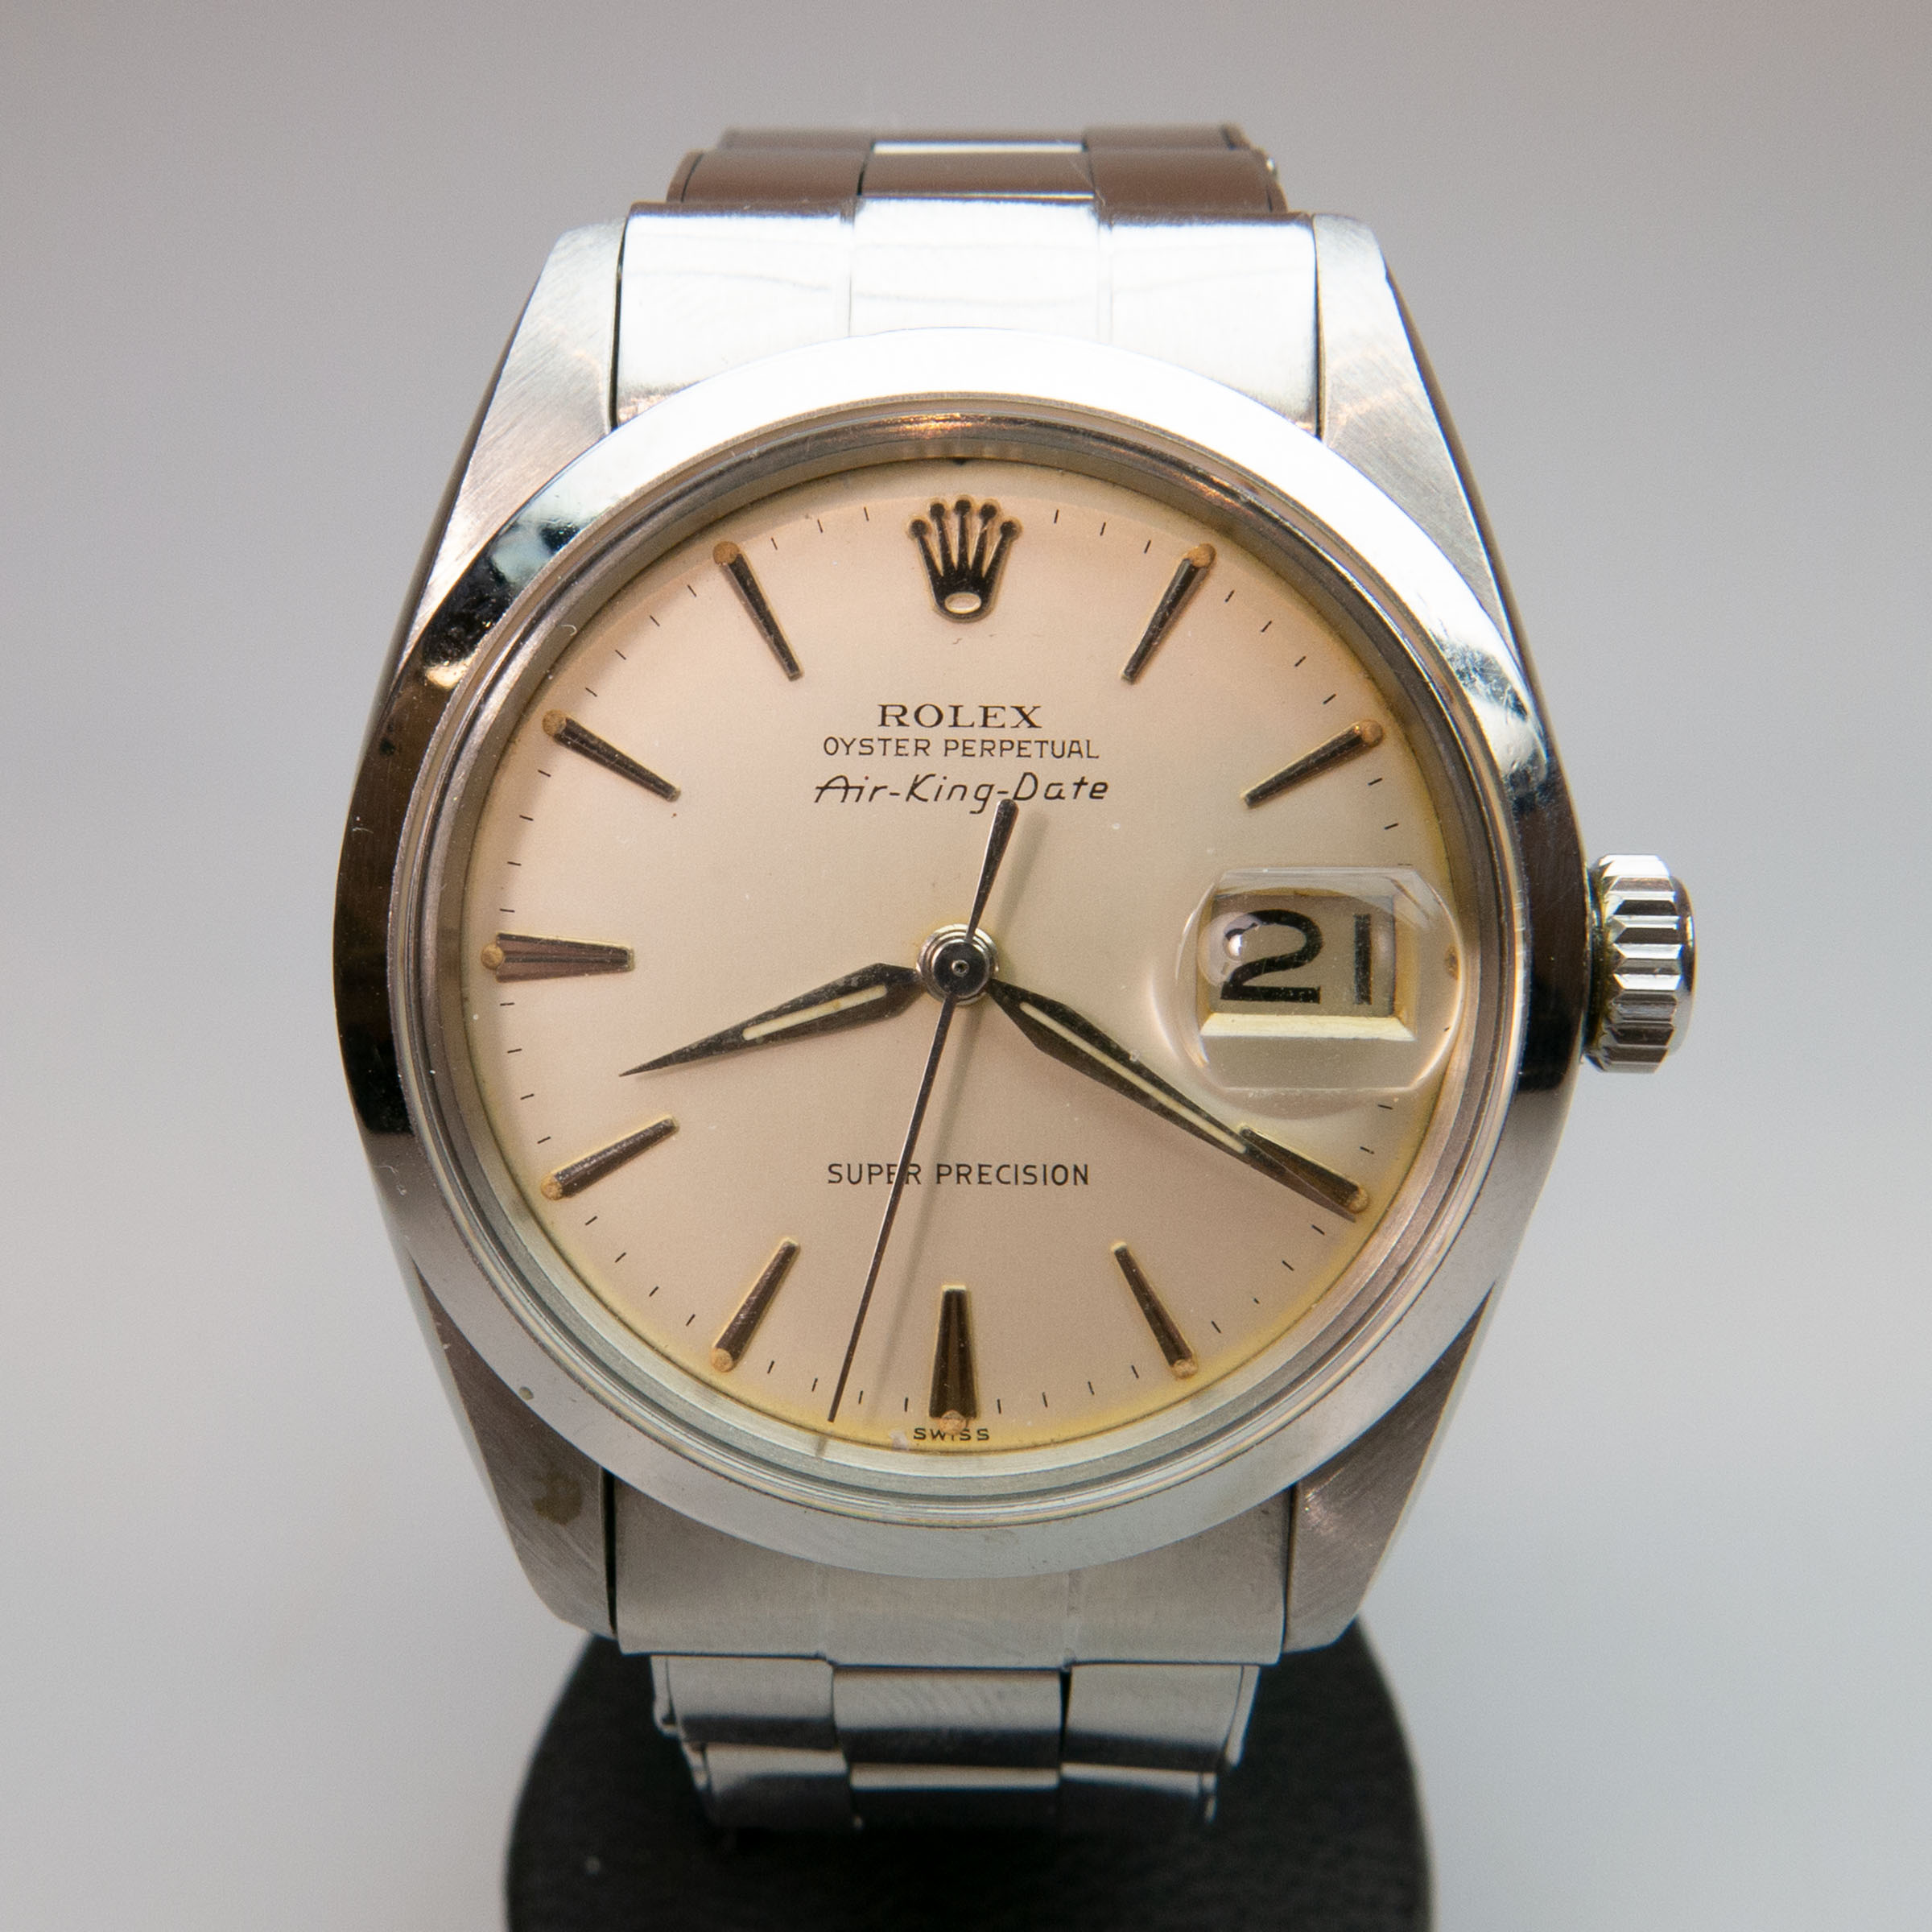 Rolex Oyster Perpetual Air-King-Date Wristwatch